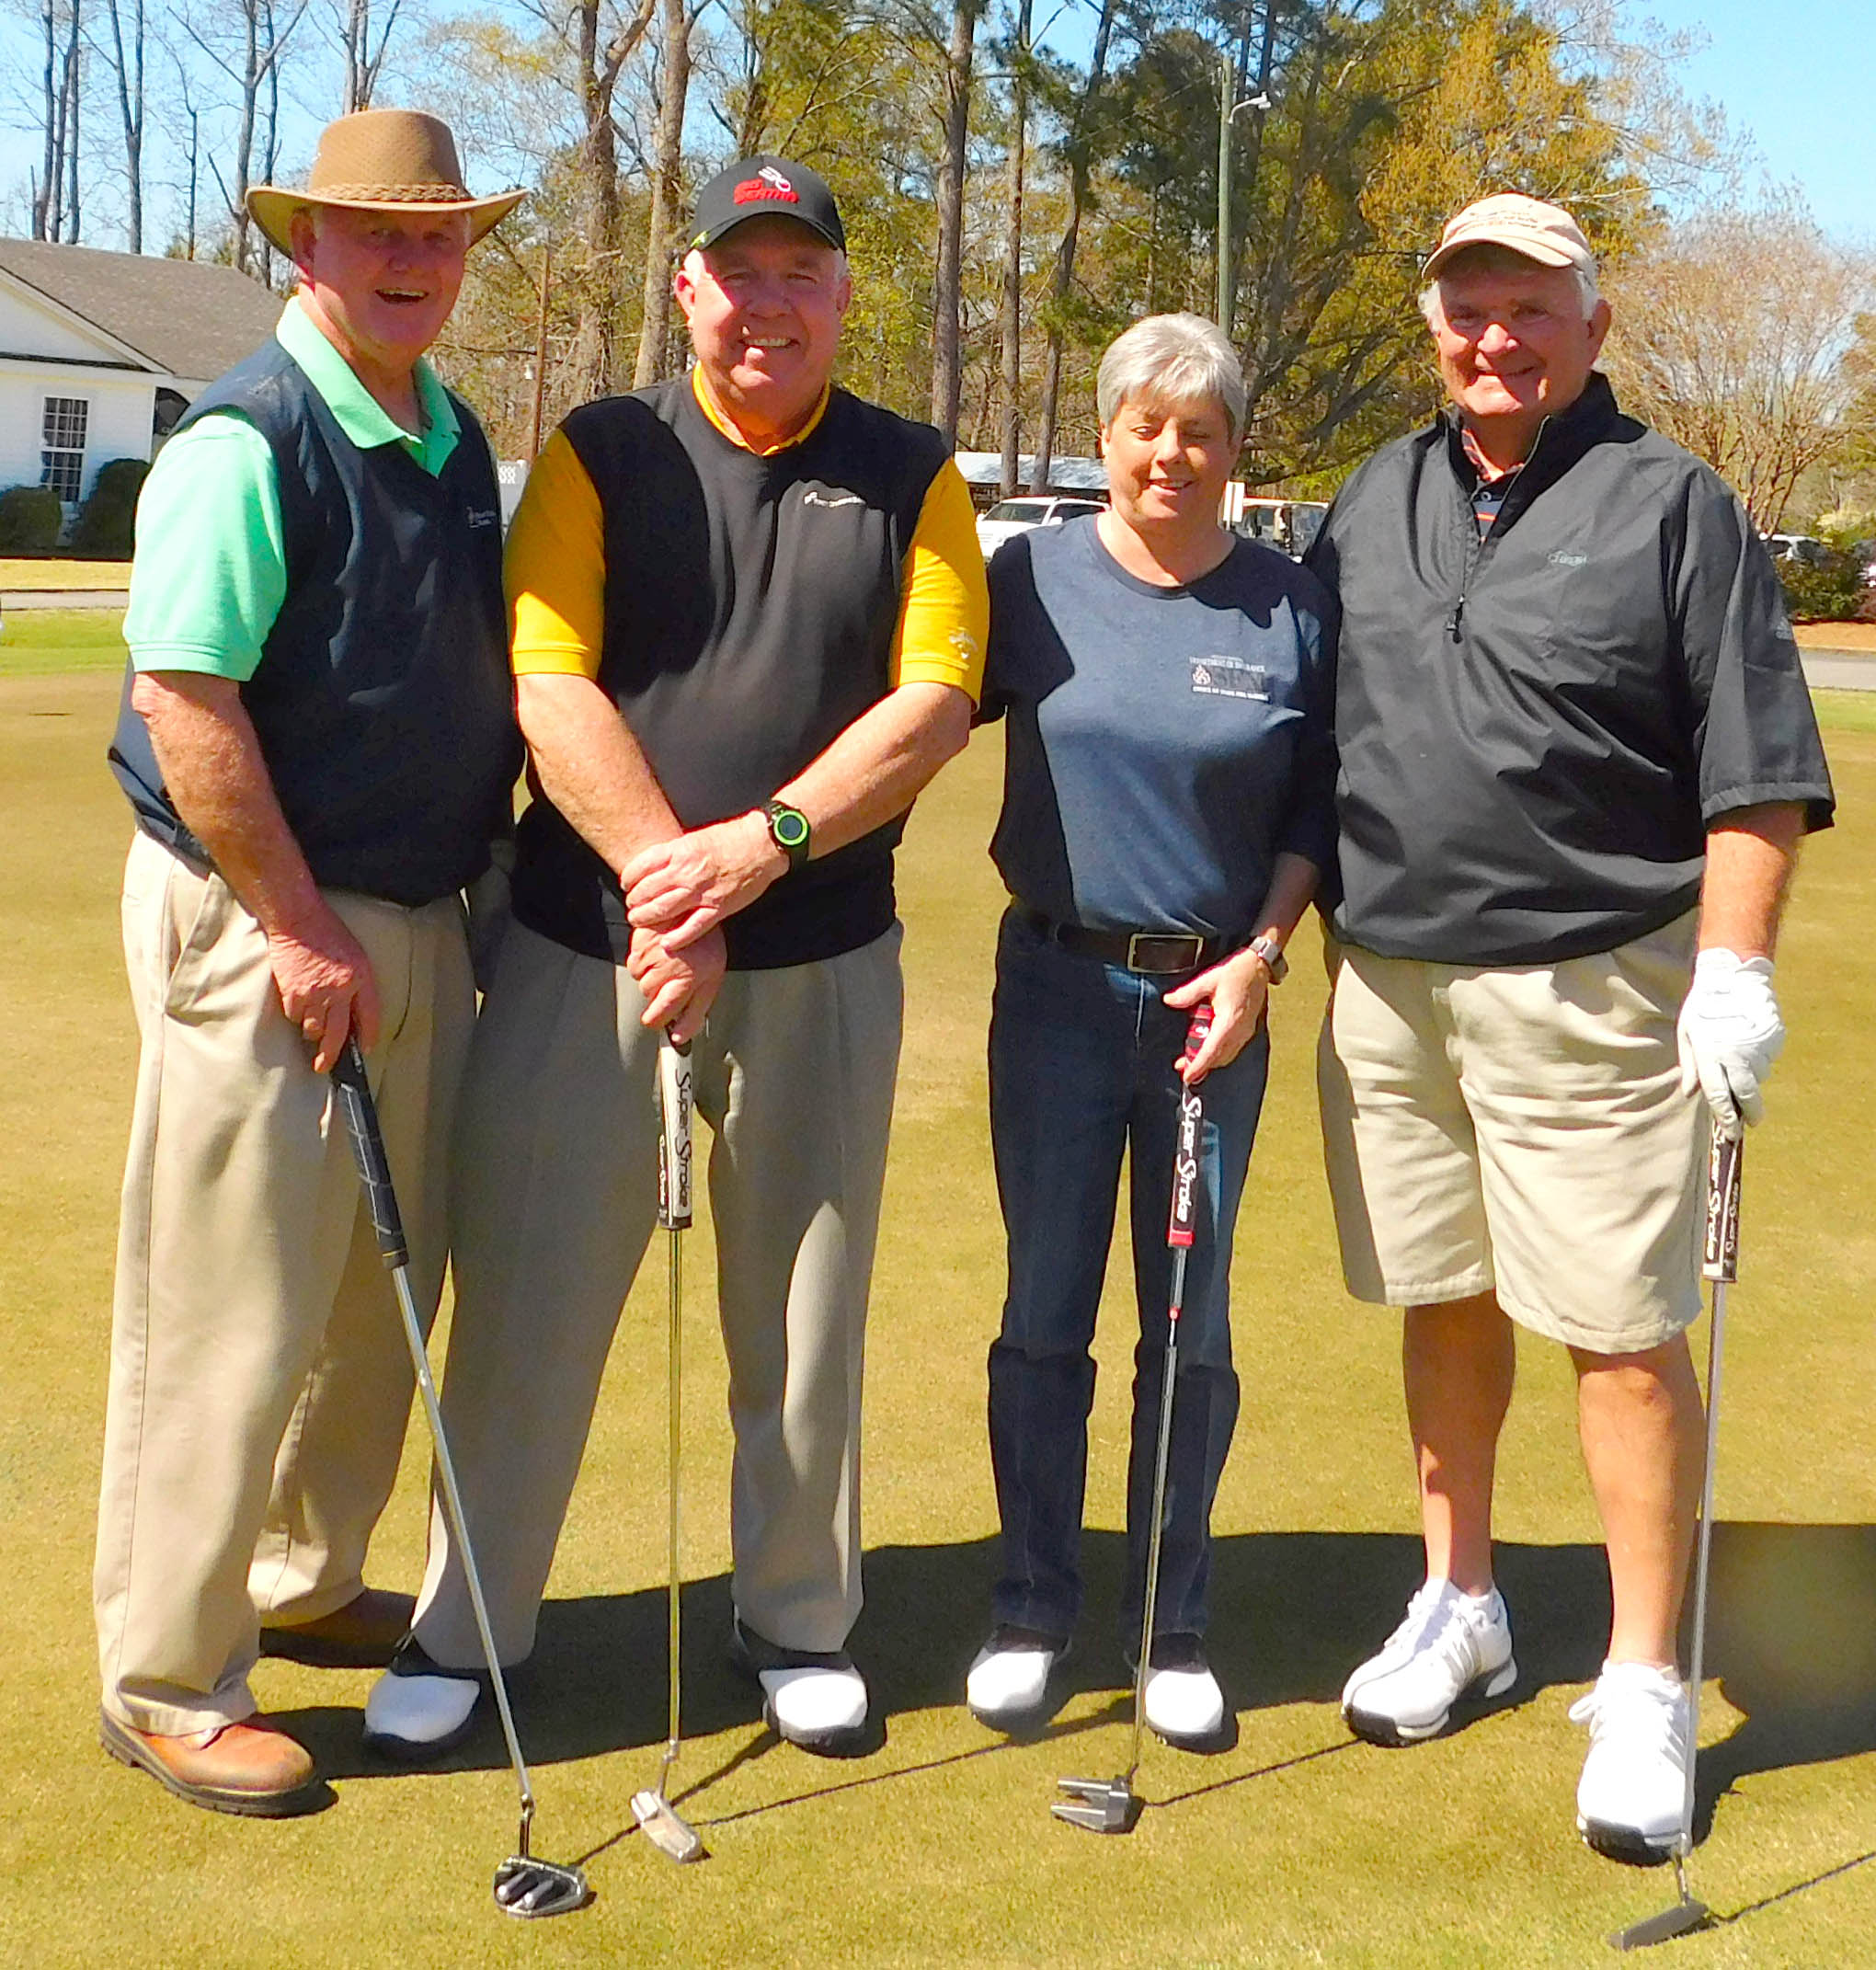 Click to enlarge,  Members of the second flight winning team in the sixth Central Carolina Community College Foundation Harnett Golf Classic were Joe Tart, Gale Tart, Ronnie Jenkins, and Darrell Smith. For information about the Foundation, donating to it, establishing a scholarship, or other fund-raising events, contact Dr. Emily Hare, Executive Director of the CCCC Foundation, 919-718-7230. Information is also available at the CCCC Foundation website, www.cccc.edu/foundation. 